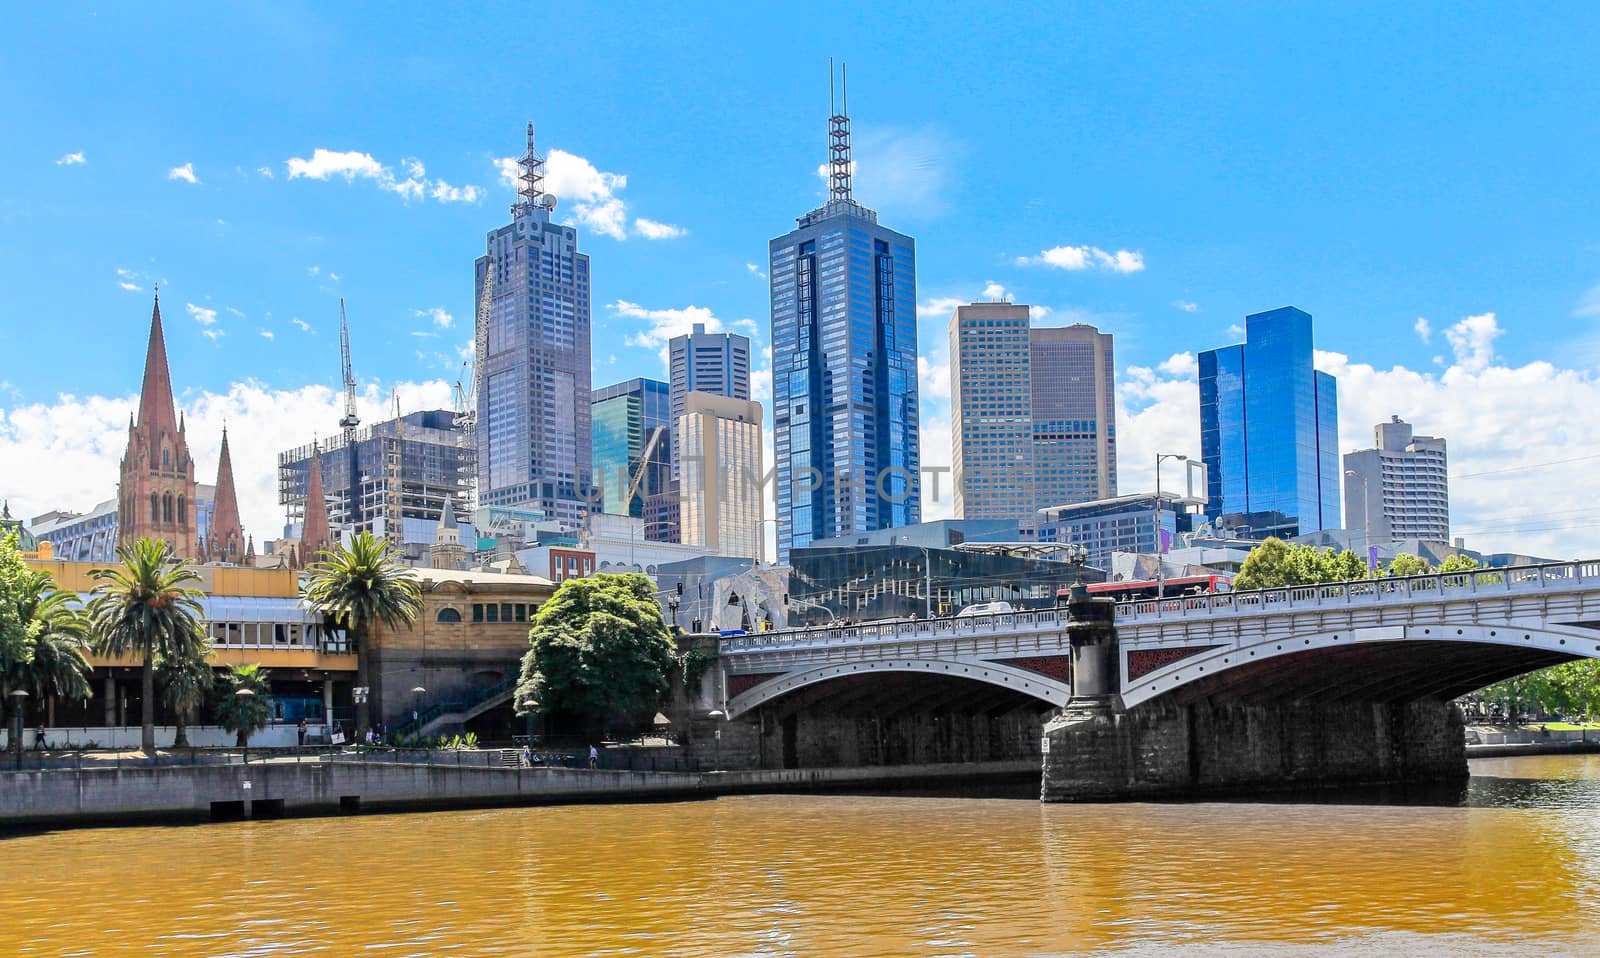 Melbourne Central business district skyscrapers with bridge over by ambeon